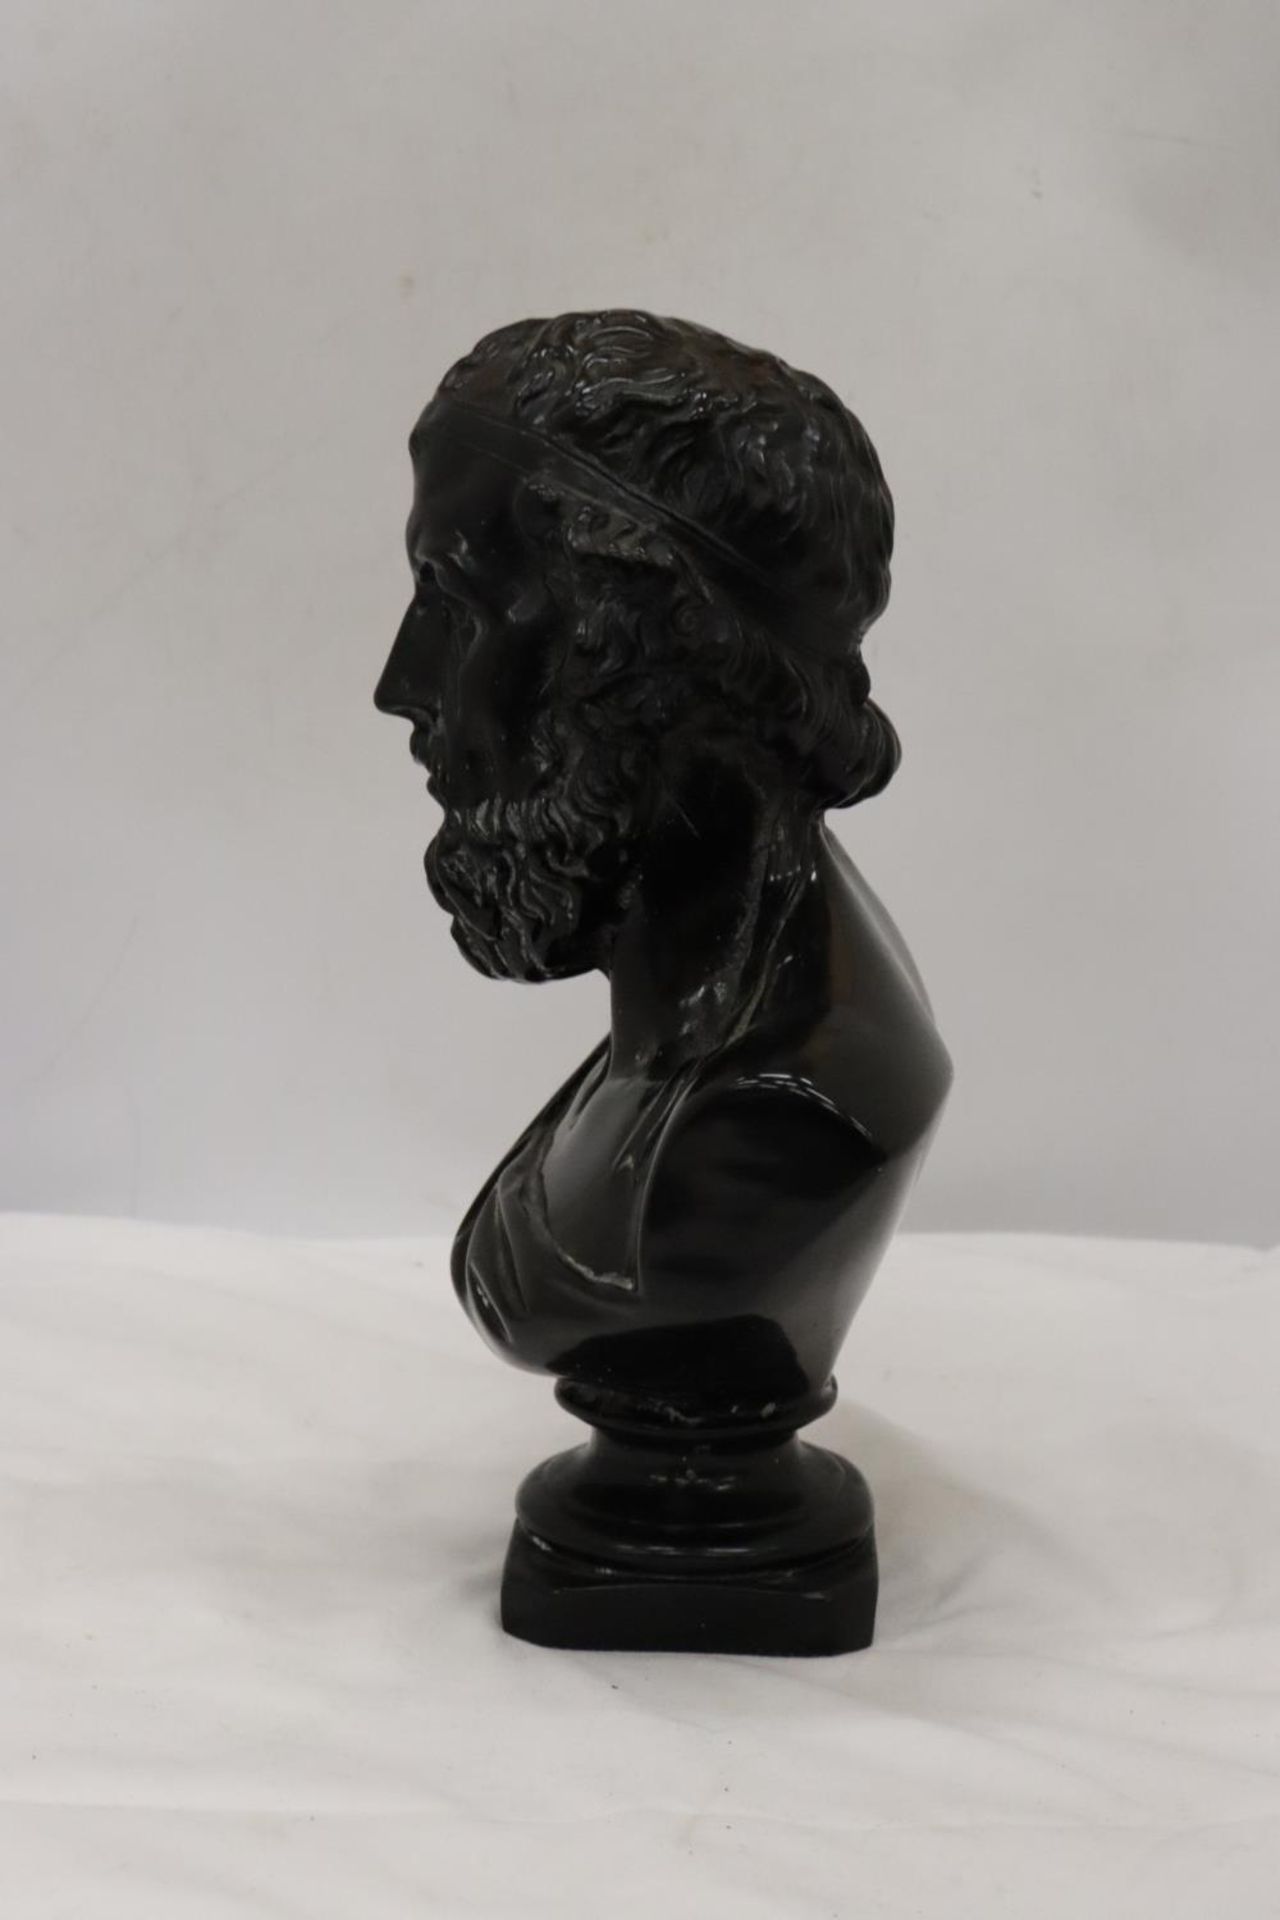 A HEAVY RESIN BUST OF CLASSICAL GREEK POET TITLED - 'HOMERE', HEIGHT 30 CM - Image 2 of 6